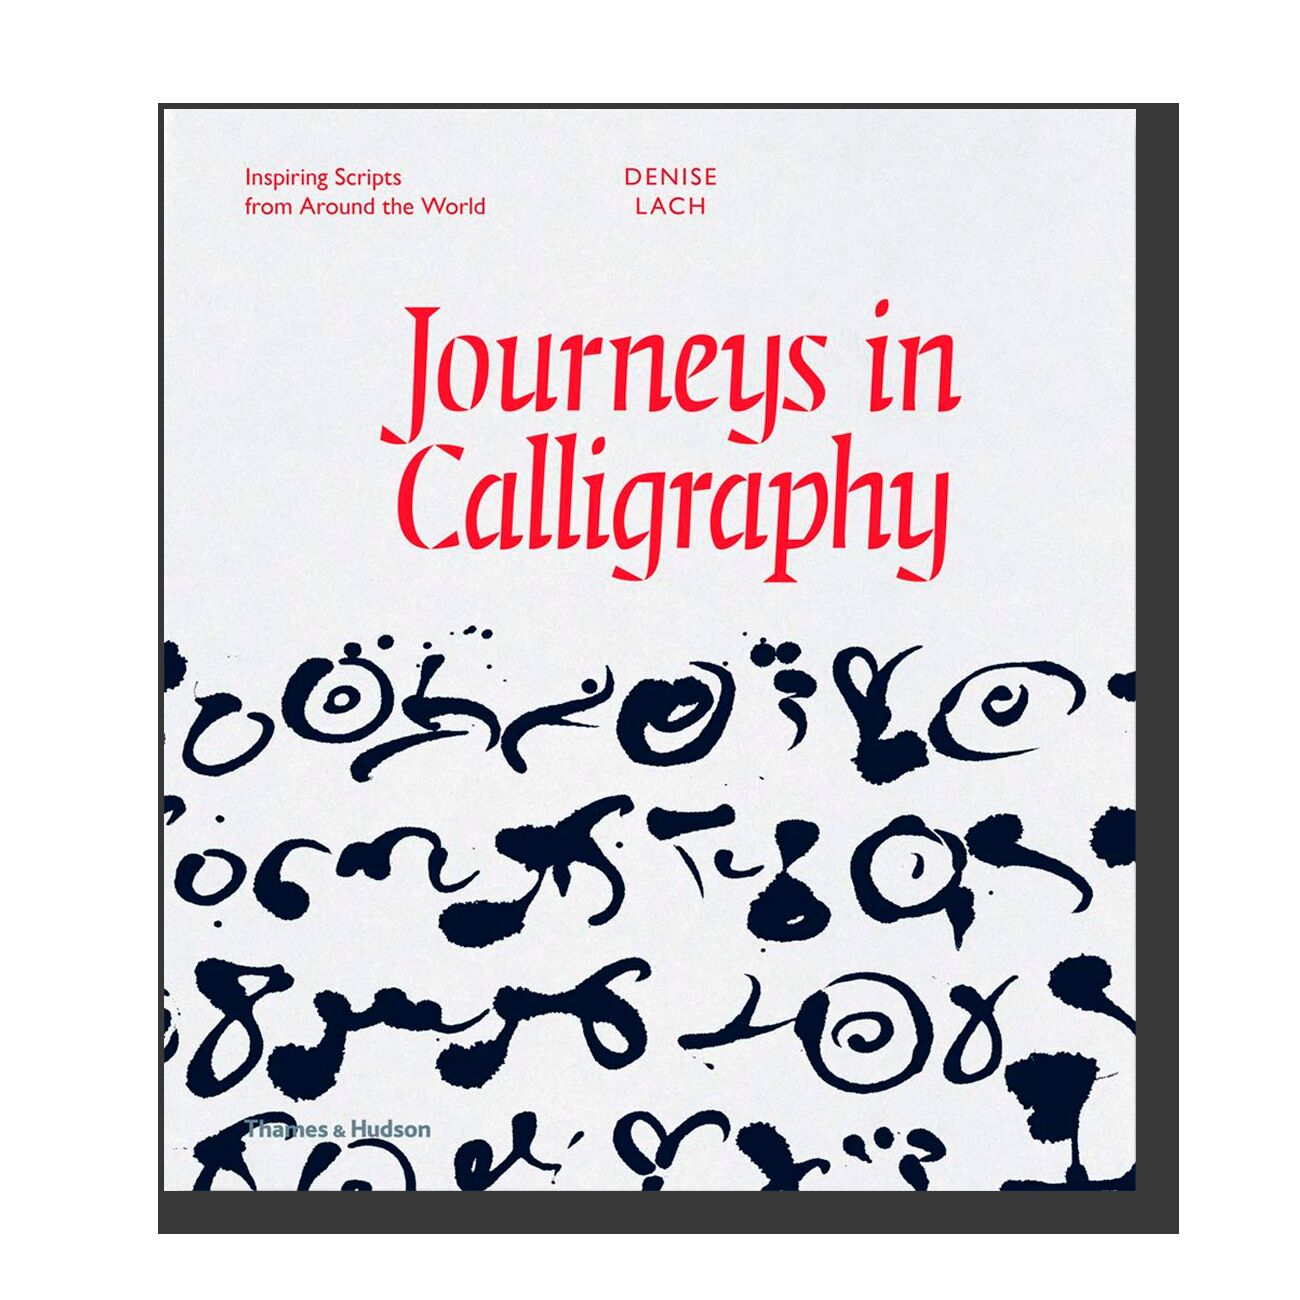 Journeys in Calligraphy: Inspiring Scripts from Around the World